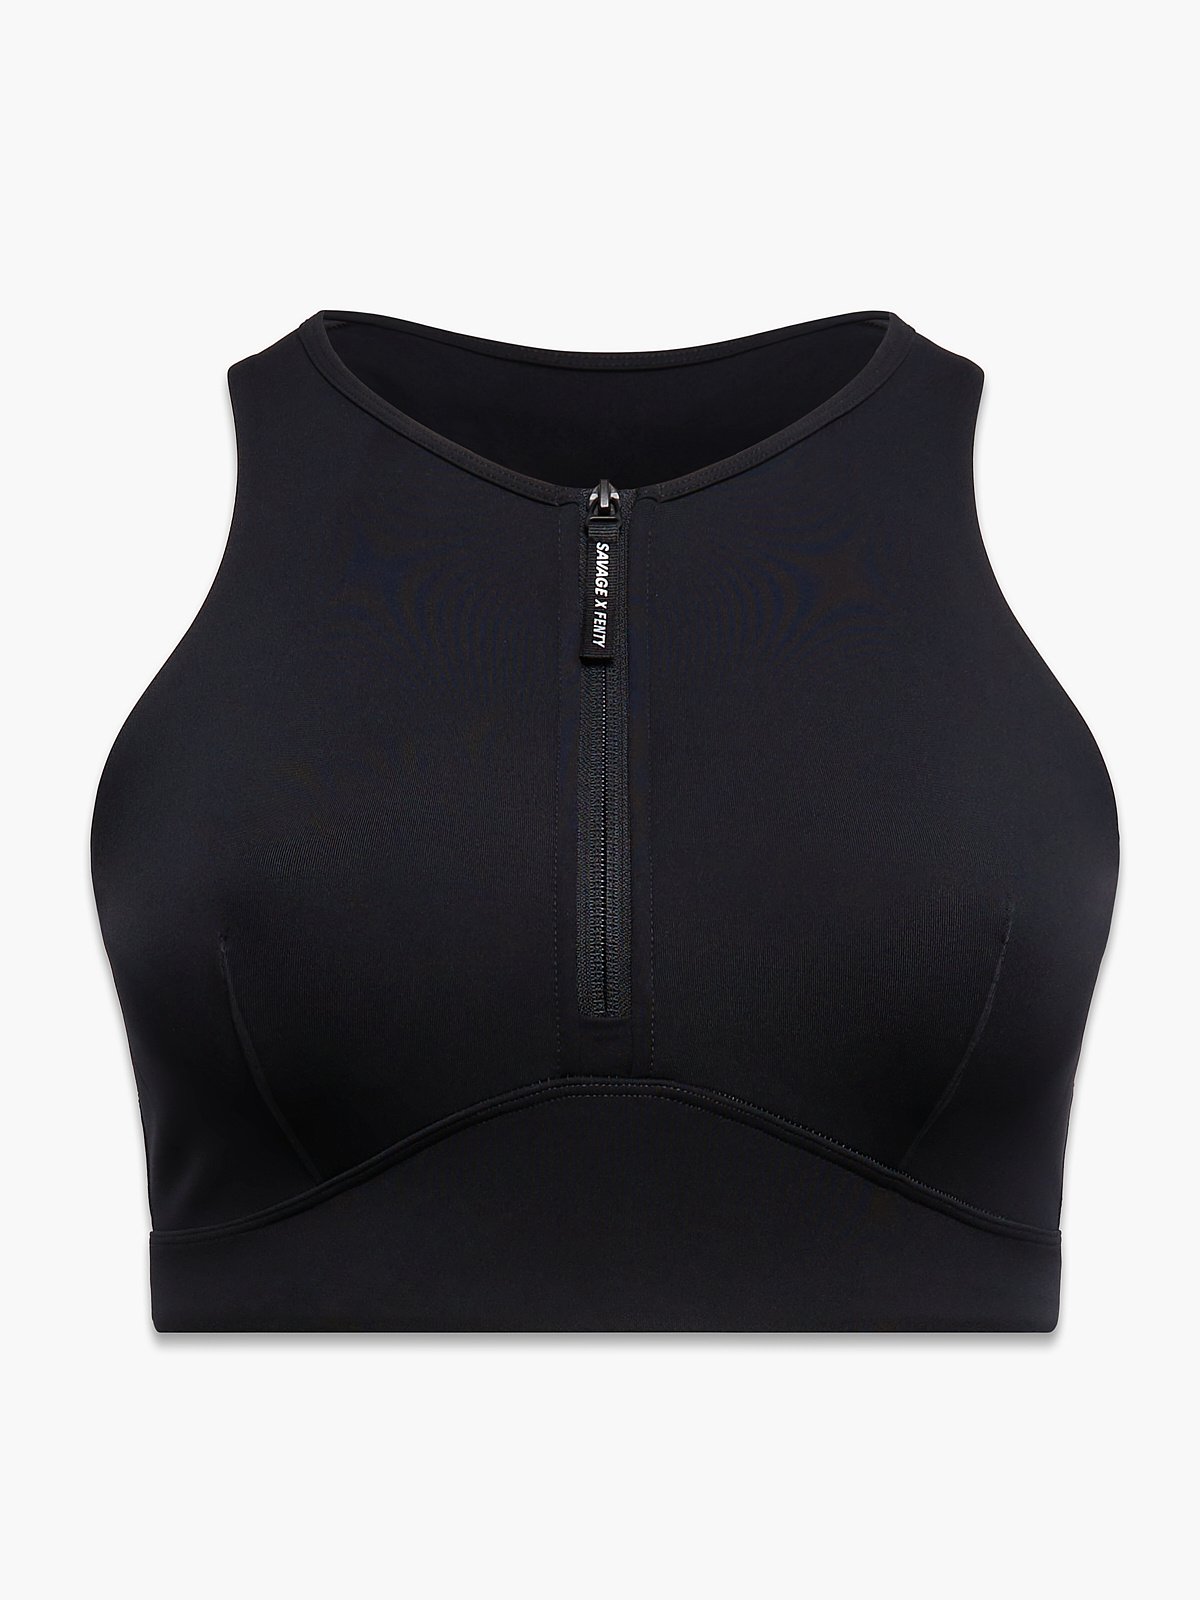 Buy Lily Easy Movement Slip On Padded Sports Bra - Black at Rs.999